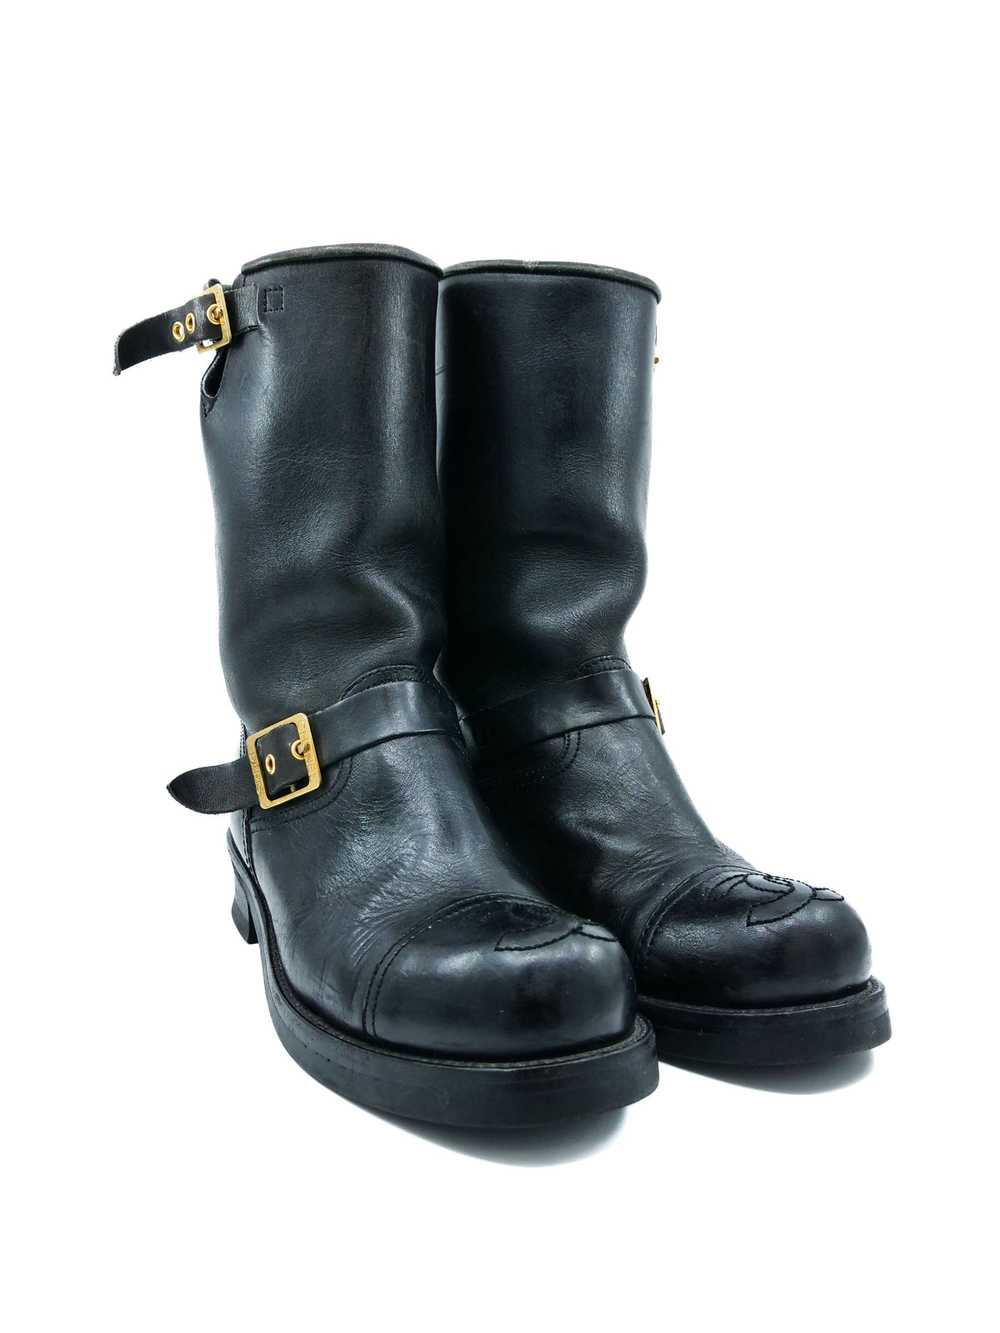 1990s Chanel Motorcycle Boots - image 3